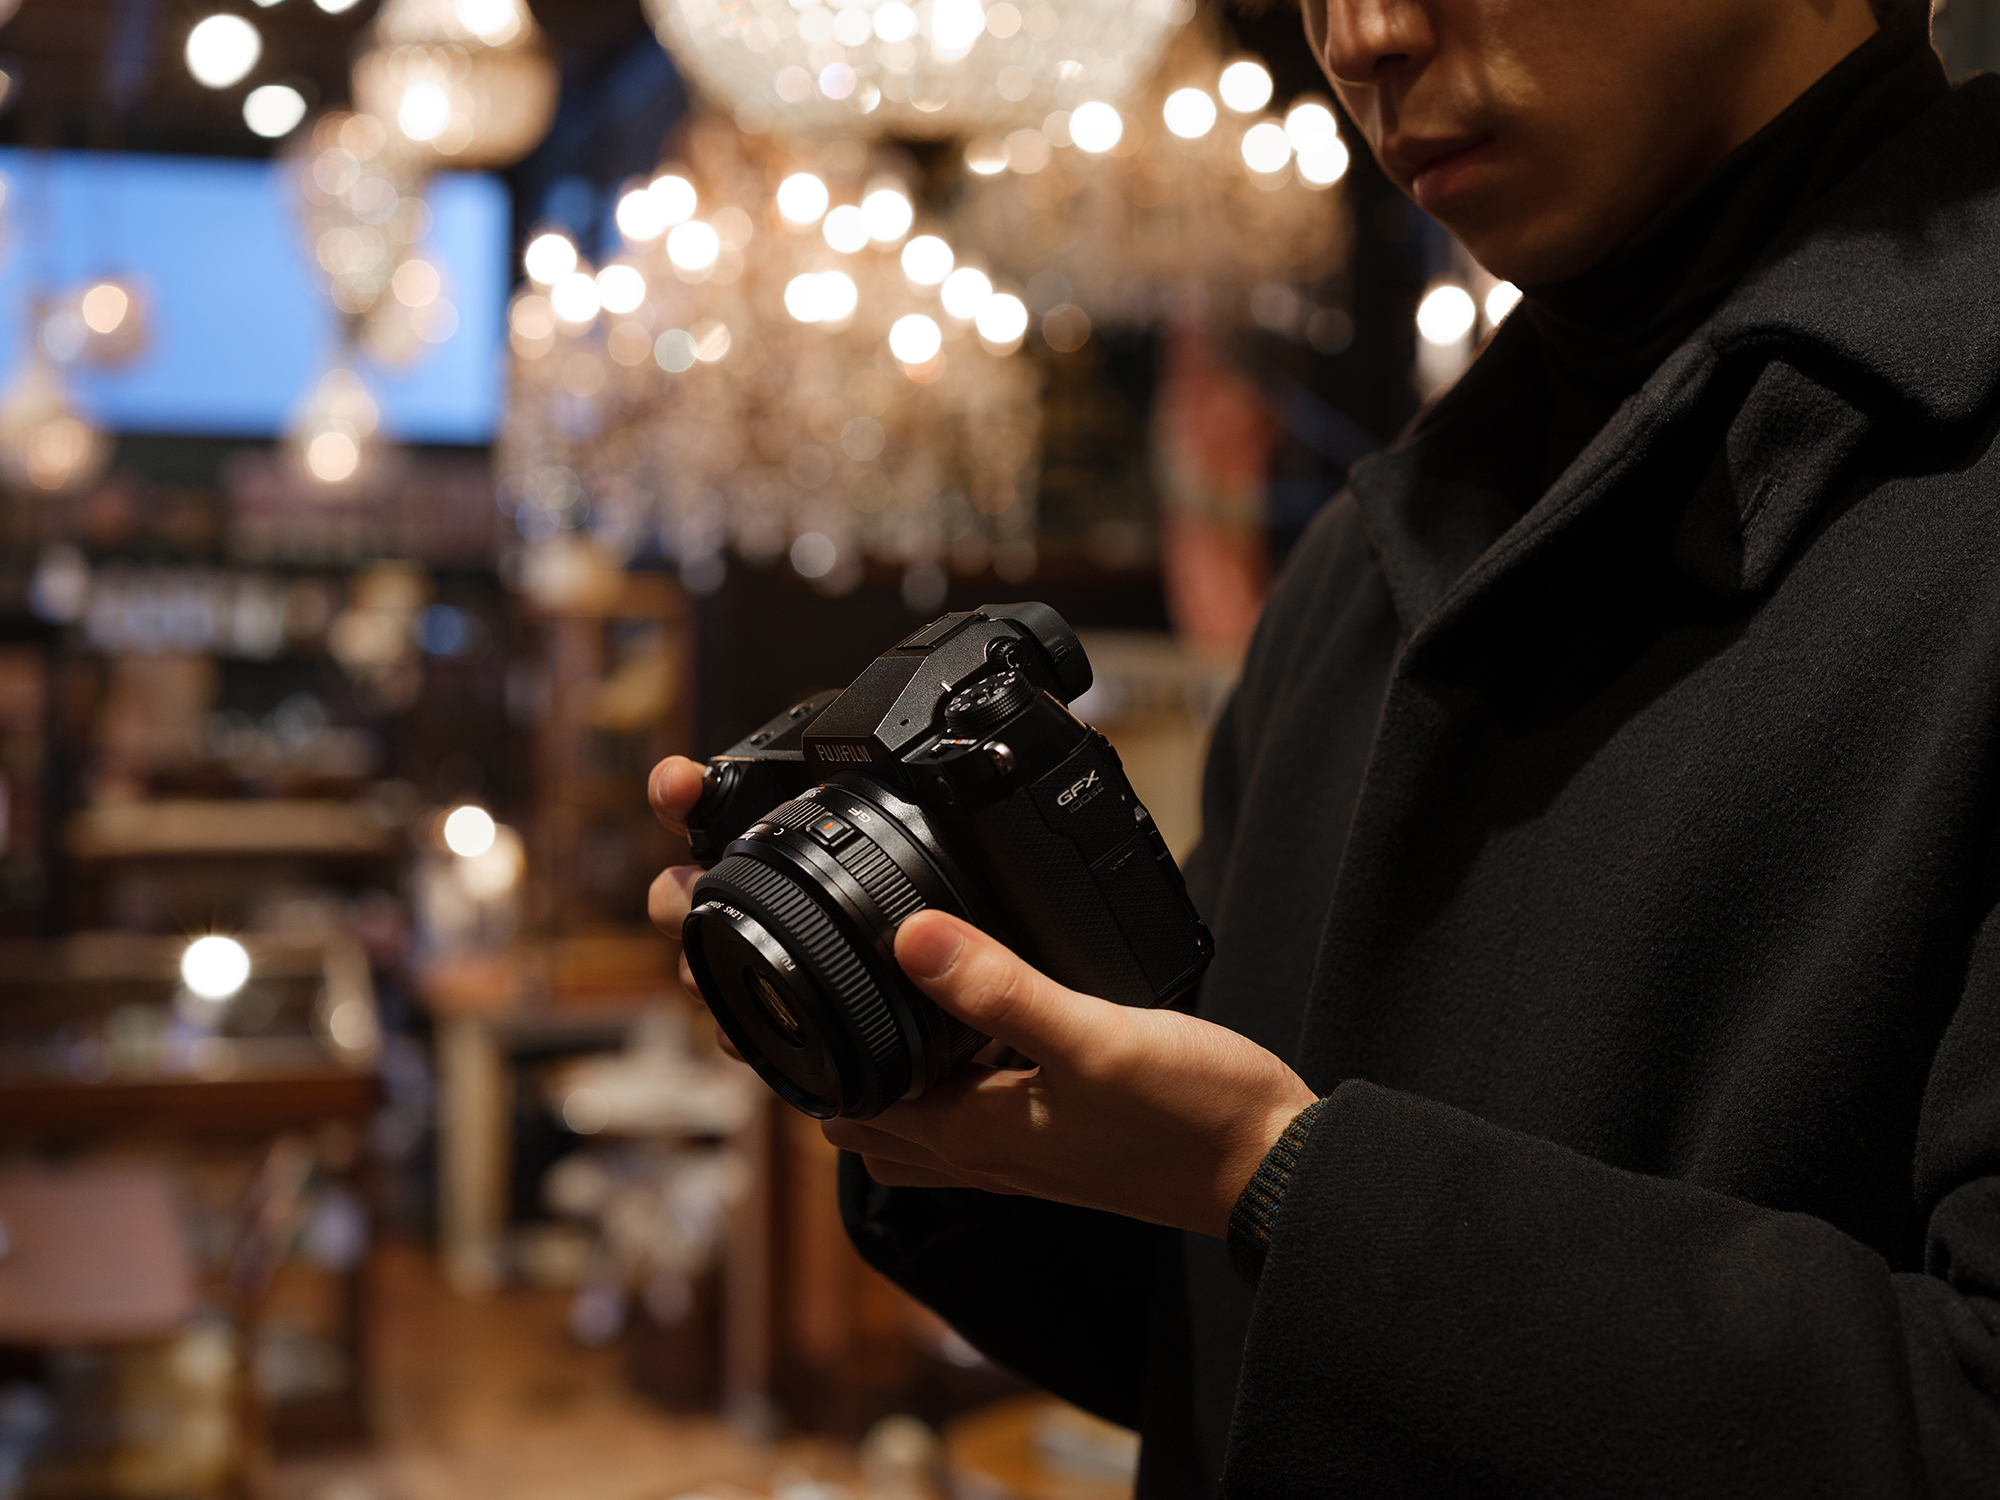 A person holding and looking down at the Fujifilm GFX 100S II in an indoor setting with blurred background. View from the person’s left side.